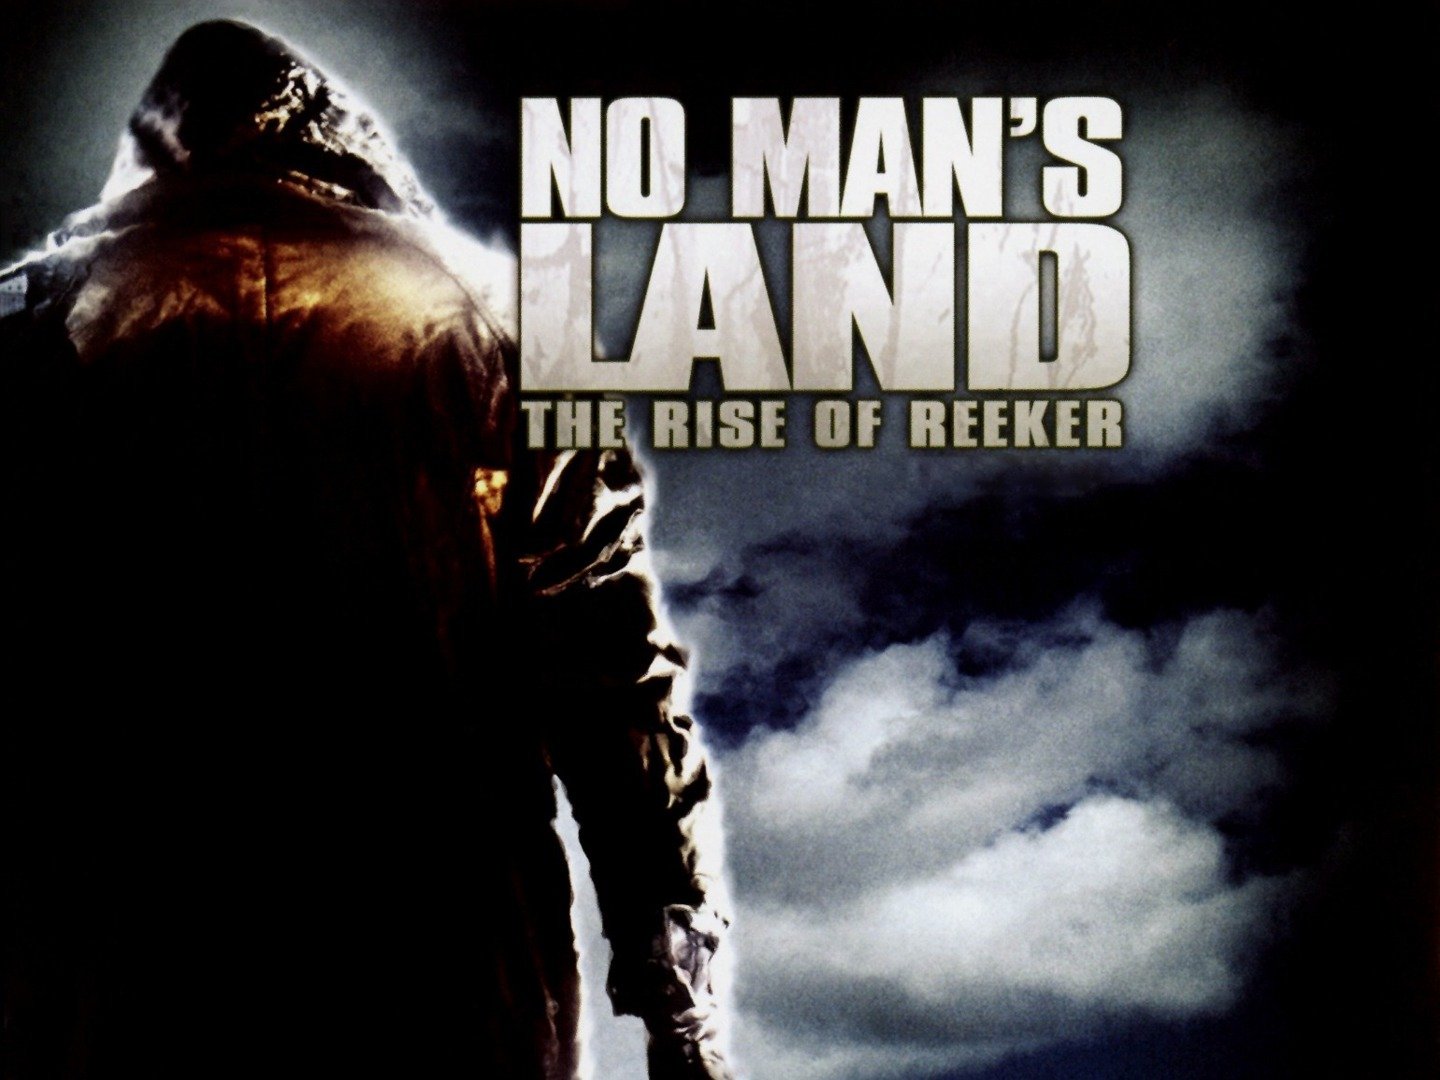 No Man's Land: The Rise of Reeker - Movie Reviews - No Man's Land The Rise Of Reeker